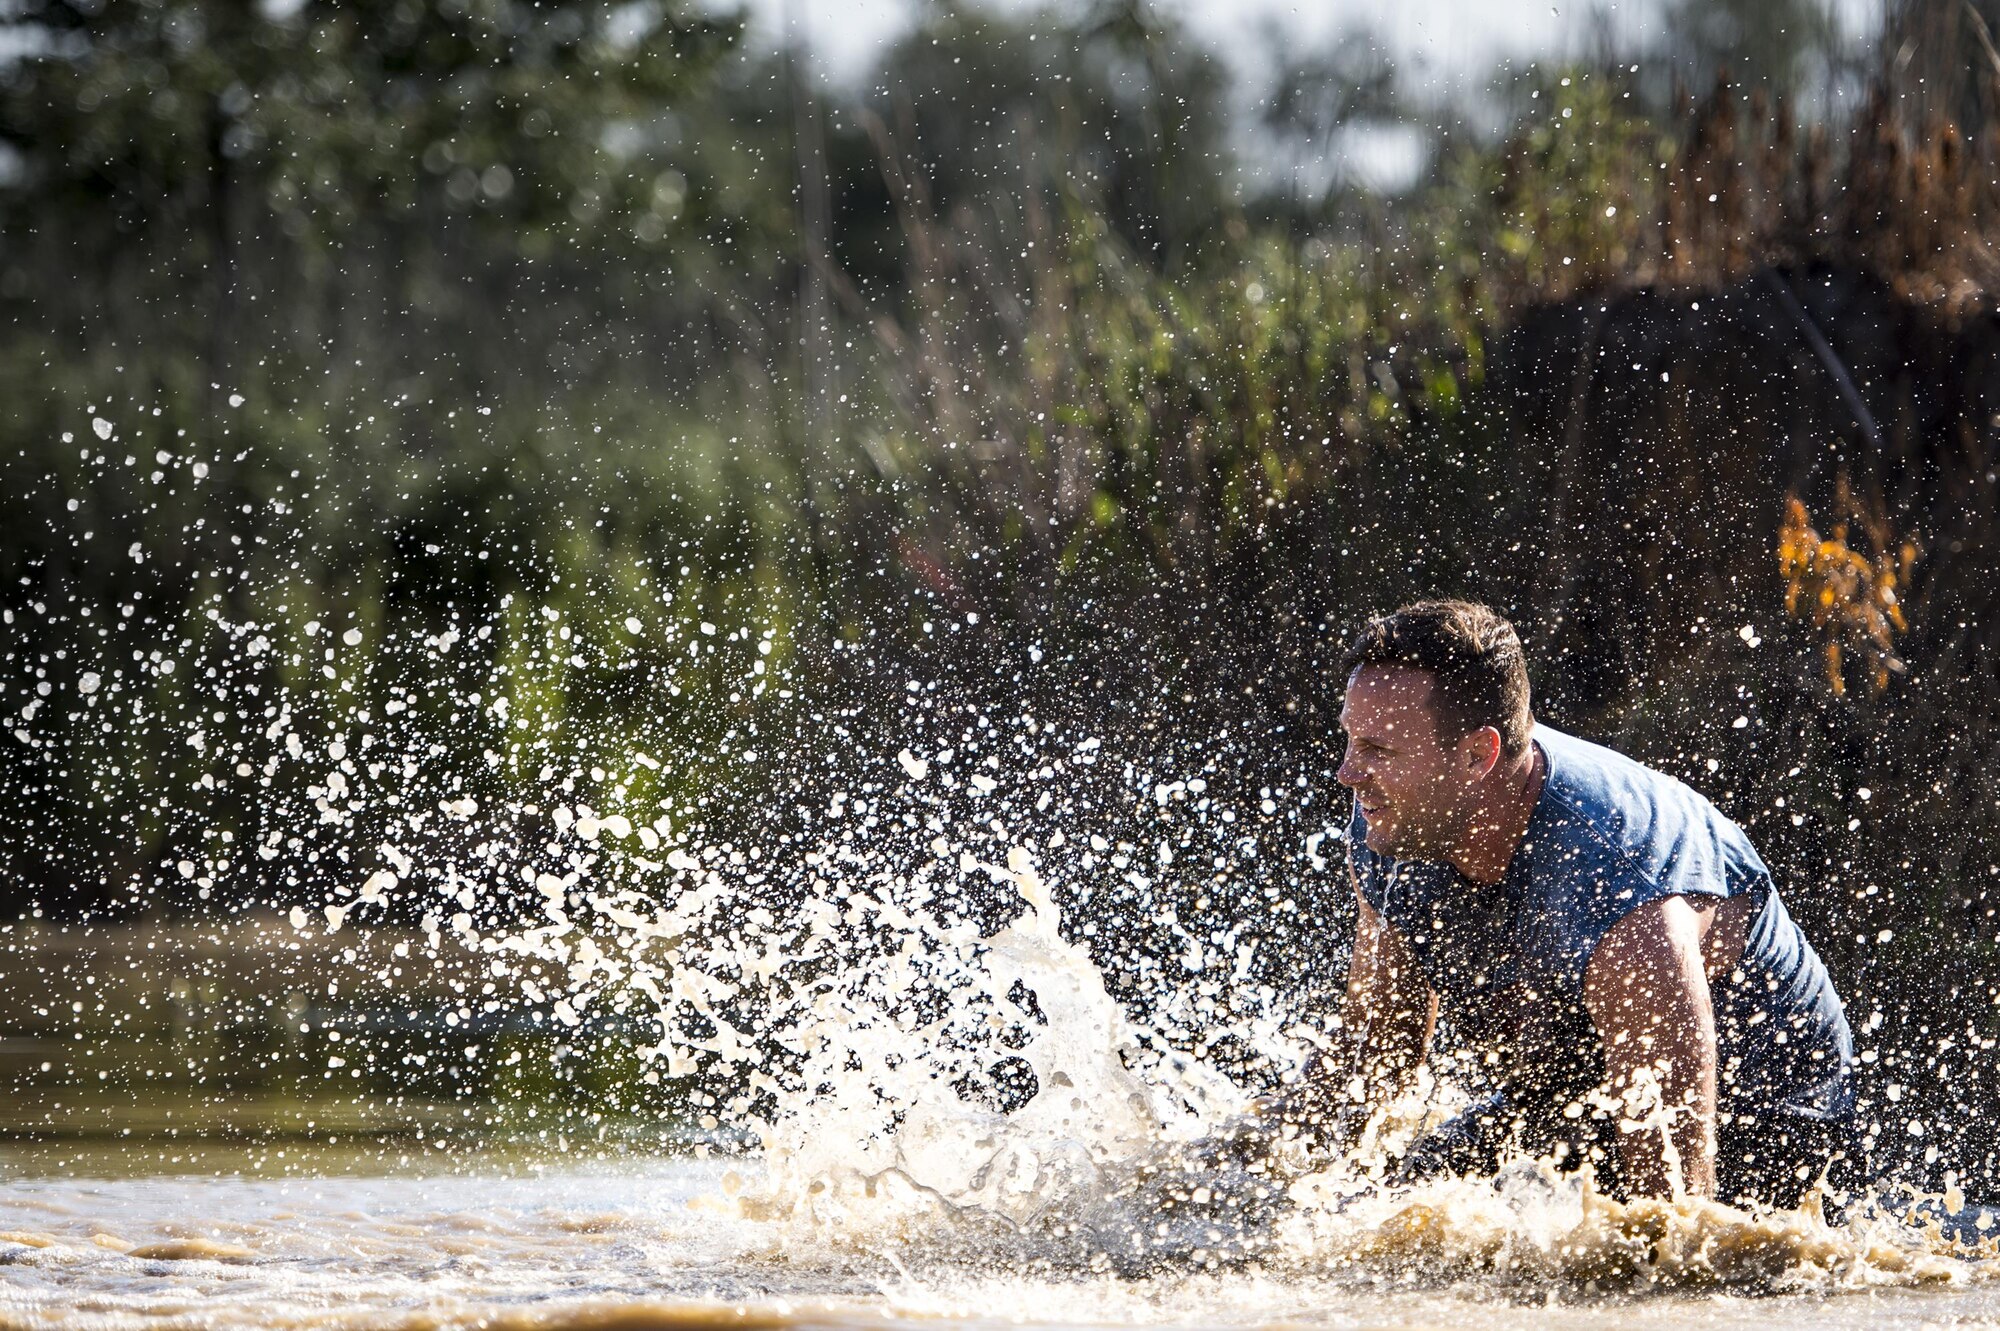 A runner splashes into a pond during the 2016 Moody Mudder, May 7, 2016, in Ray City, Ga. The Mudder challenged nearly 500 competitors to complete 20 obstacles on a 3.12-mile course for the third year in a row. (U.S. Air Force photo by Senior Airman Ryan Callaghan/Released)